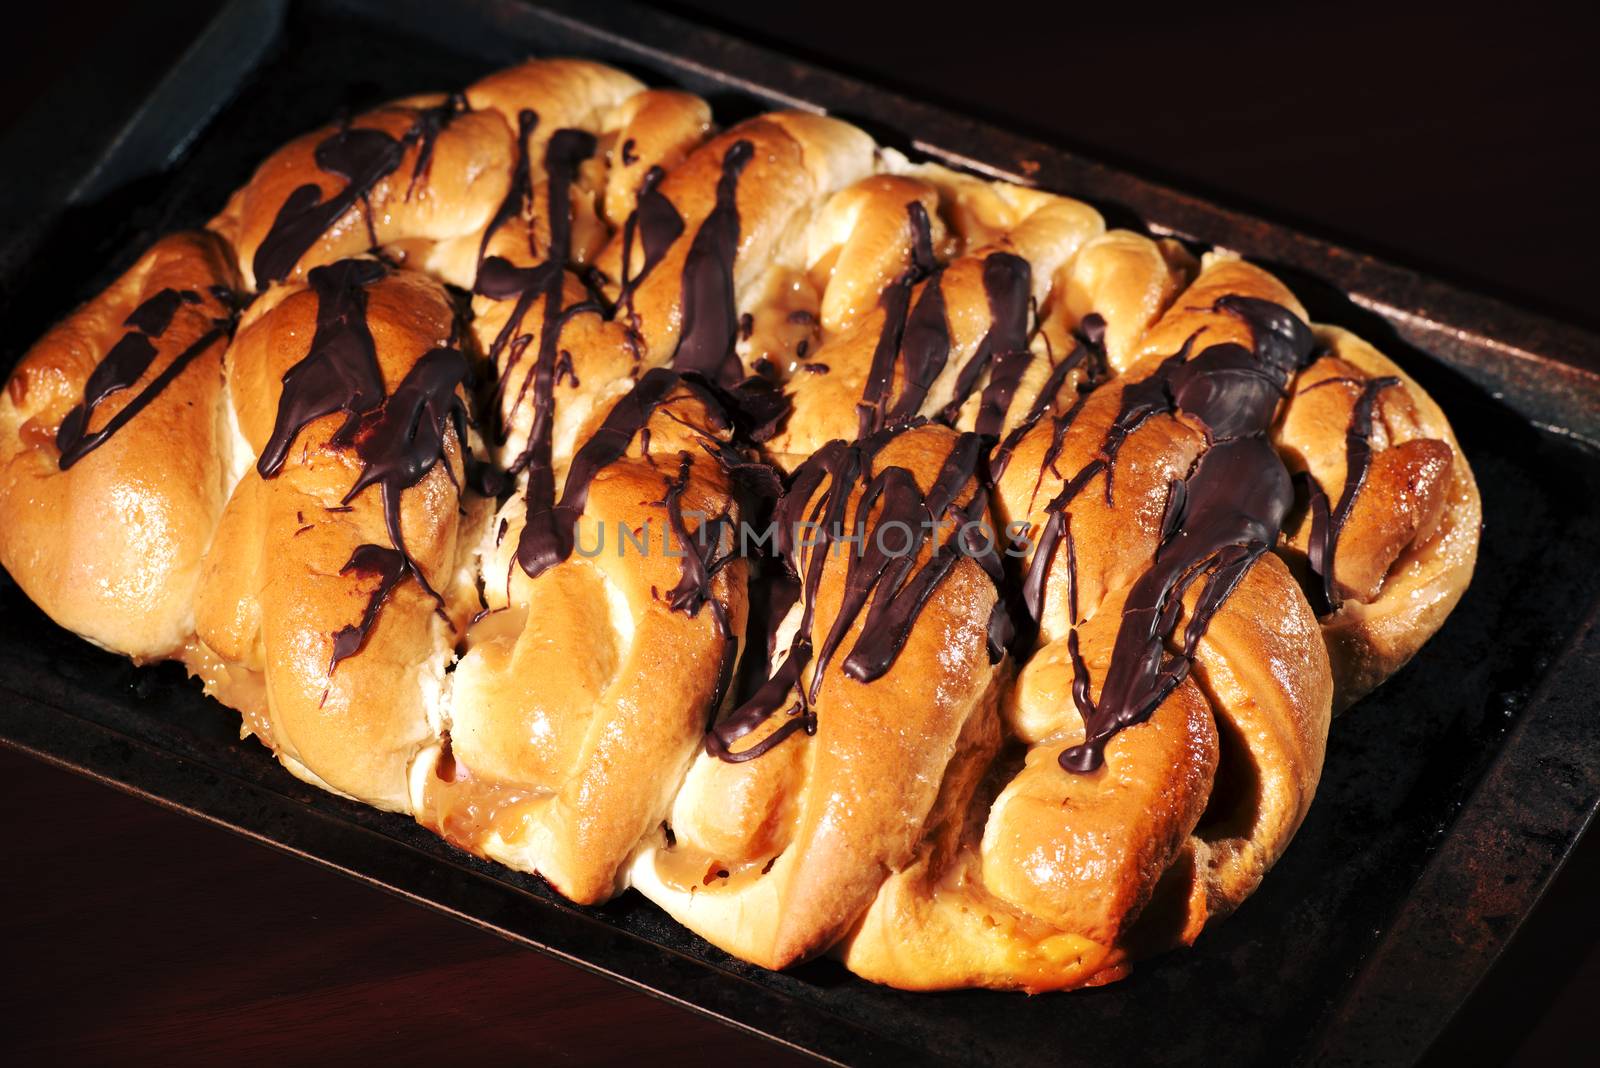 Chocolate and caramel danish pastry on a baking tray